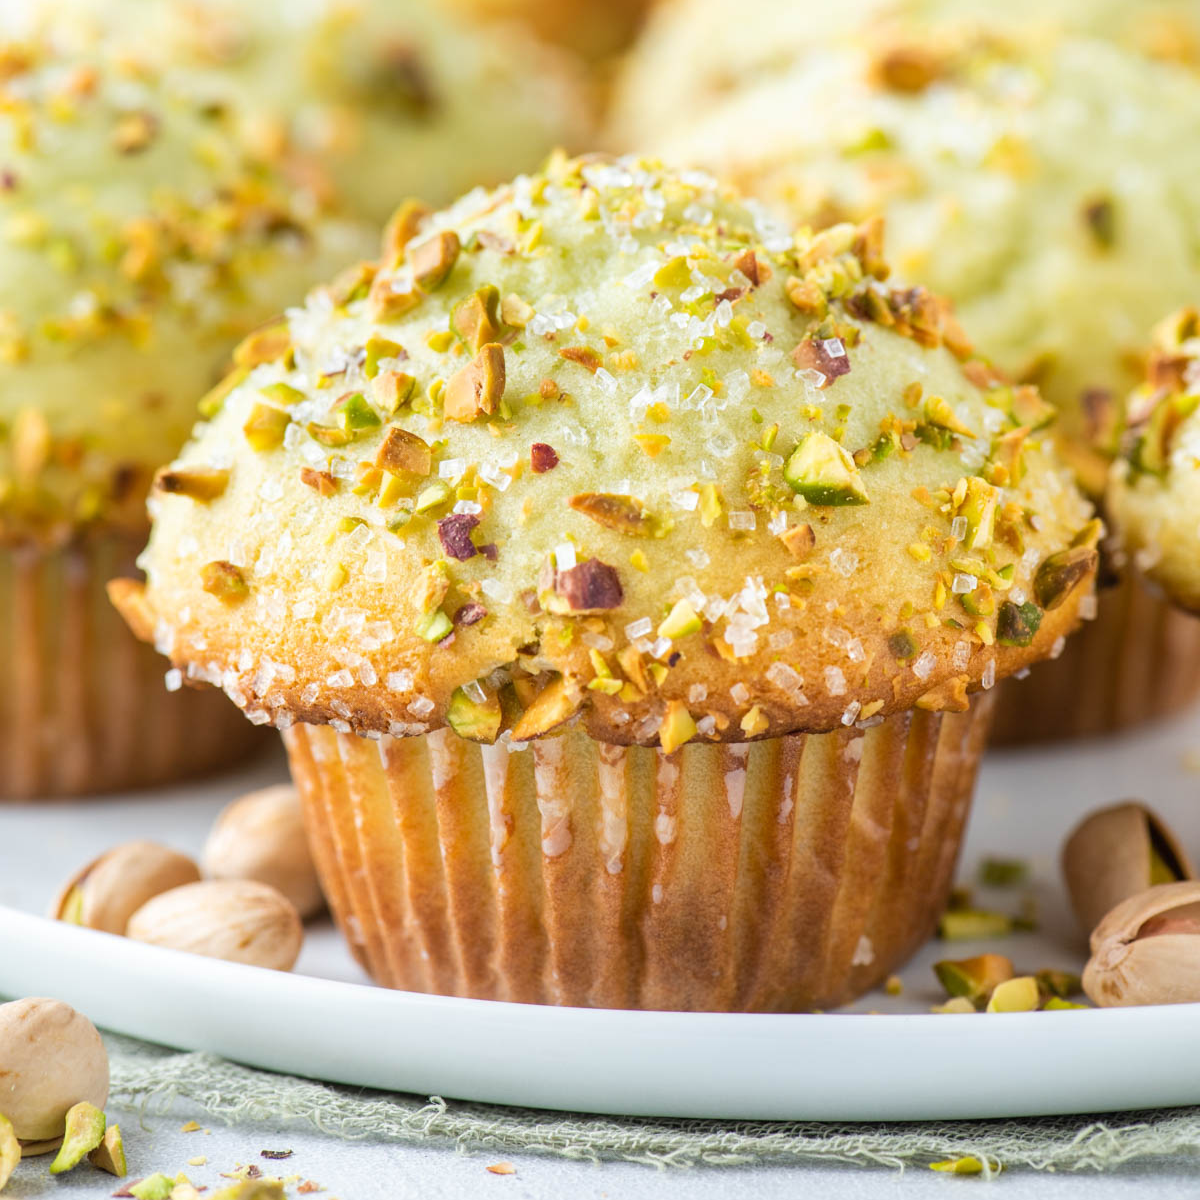 pistachio muffins surrounded by whole pistachios in shells